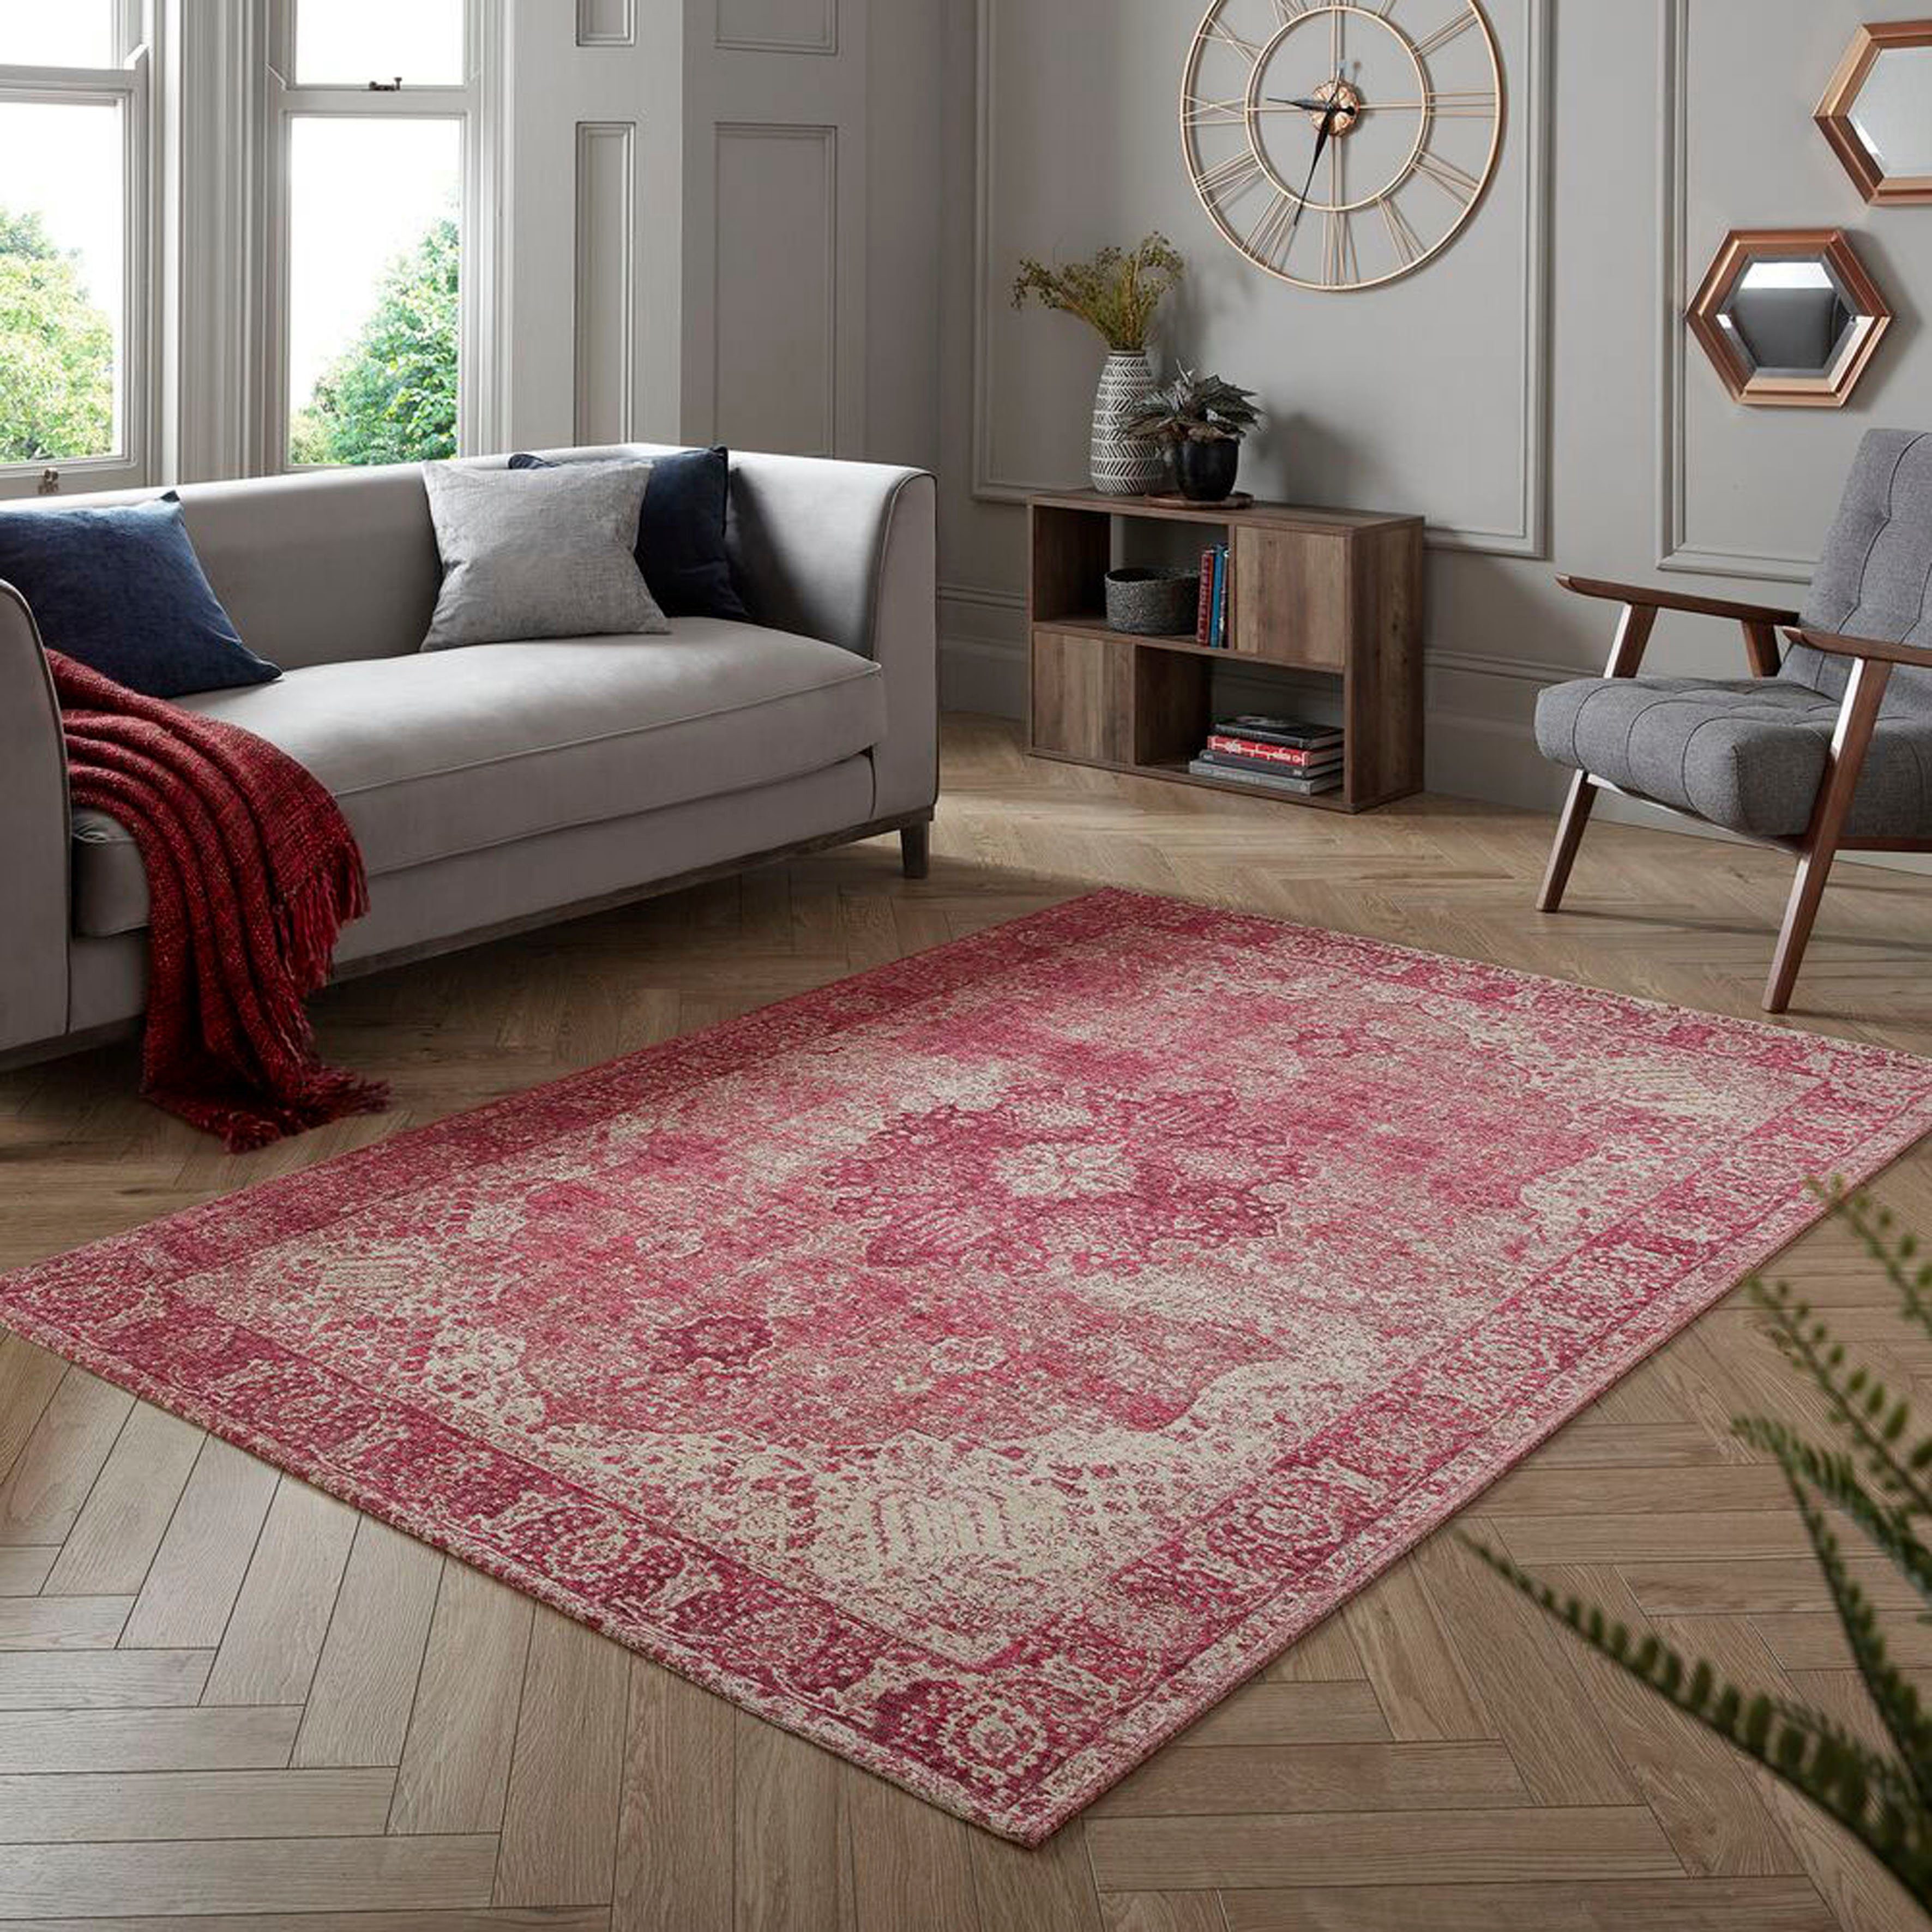 RUGS, Antique, rechteckig, 4 Teppich mm, Höhe: Vintage-Muster rot FLAIR